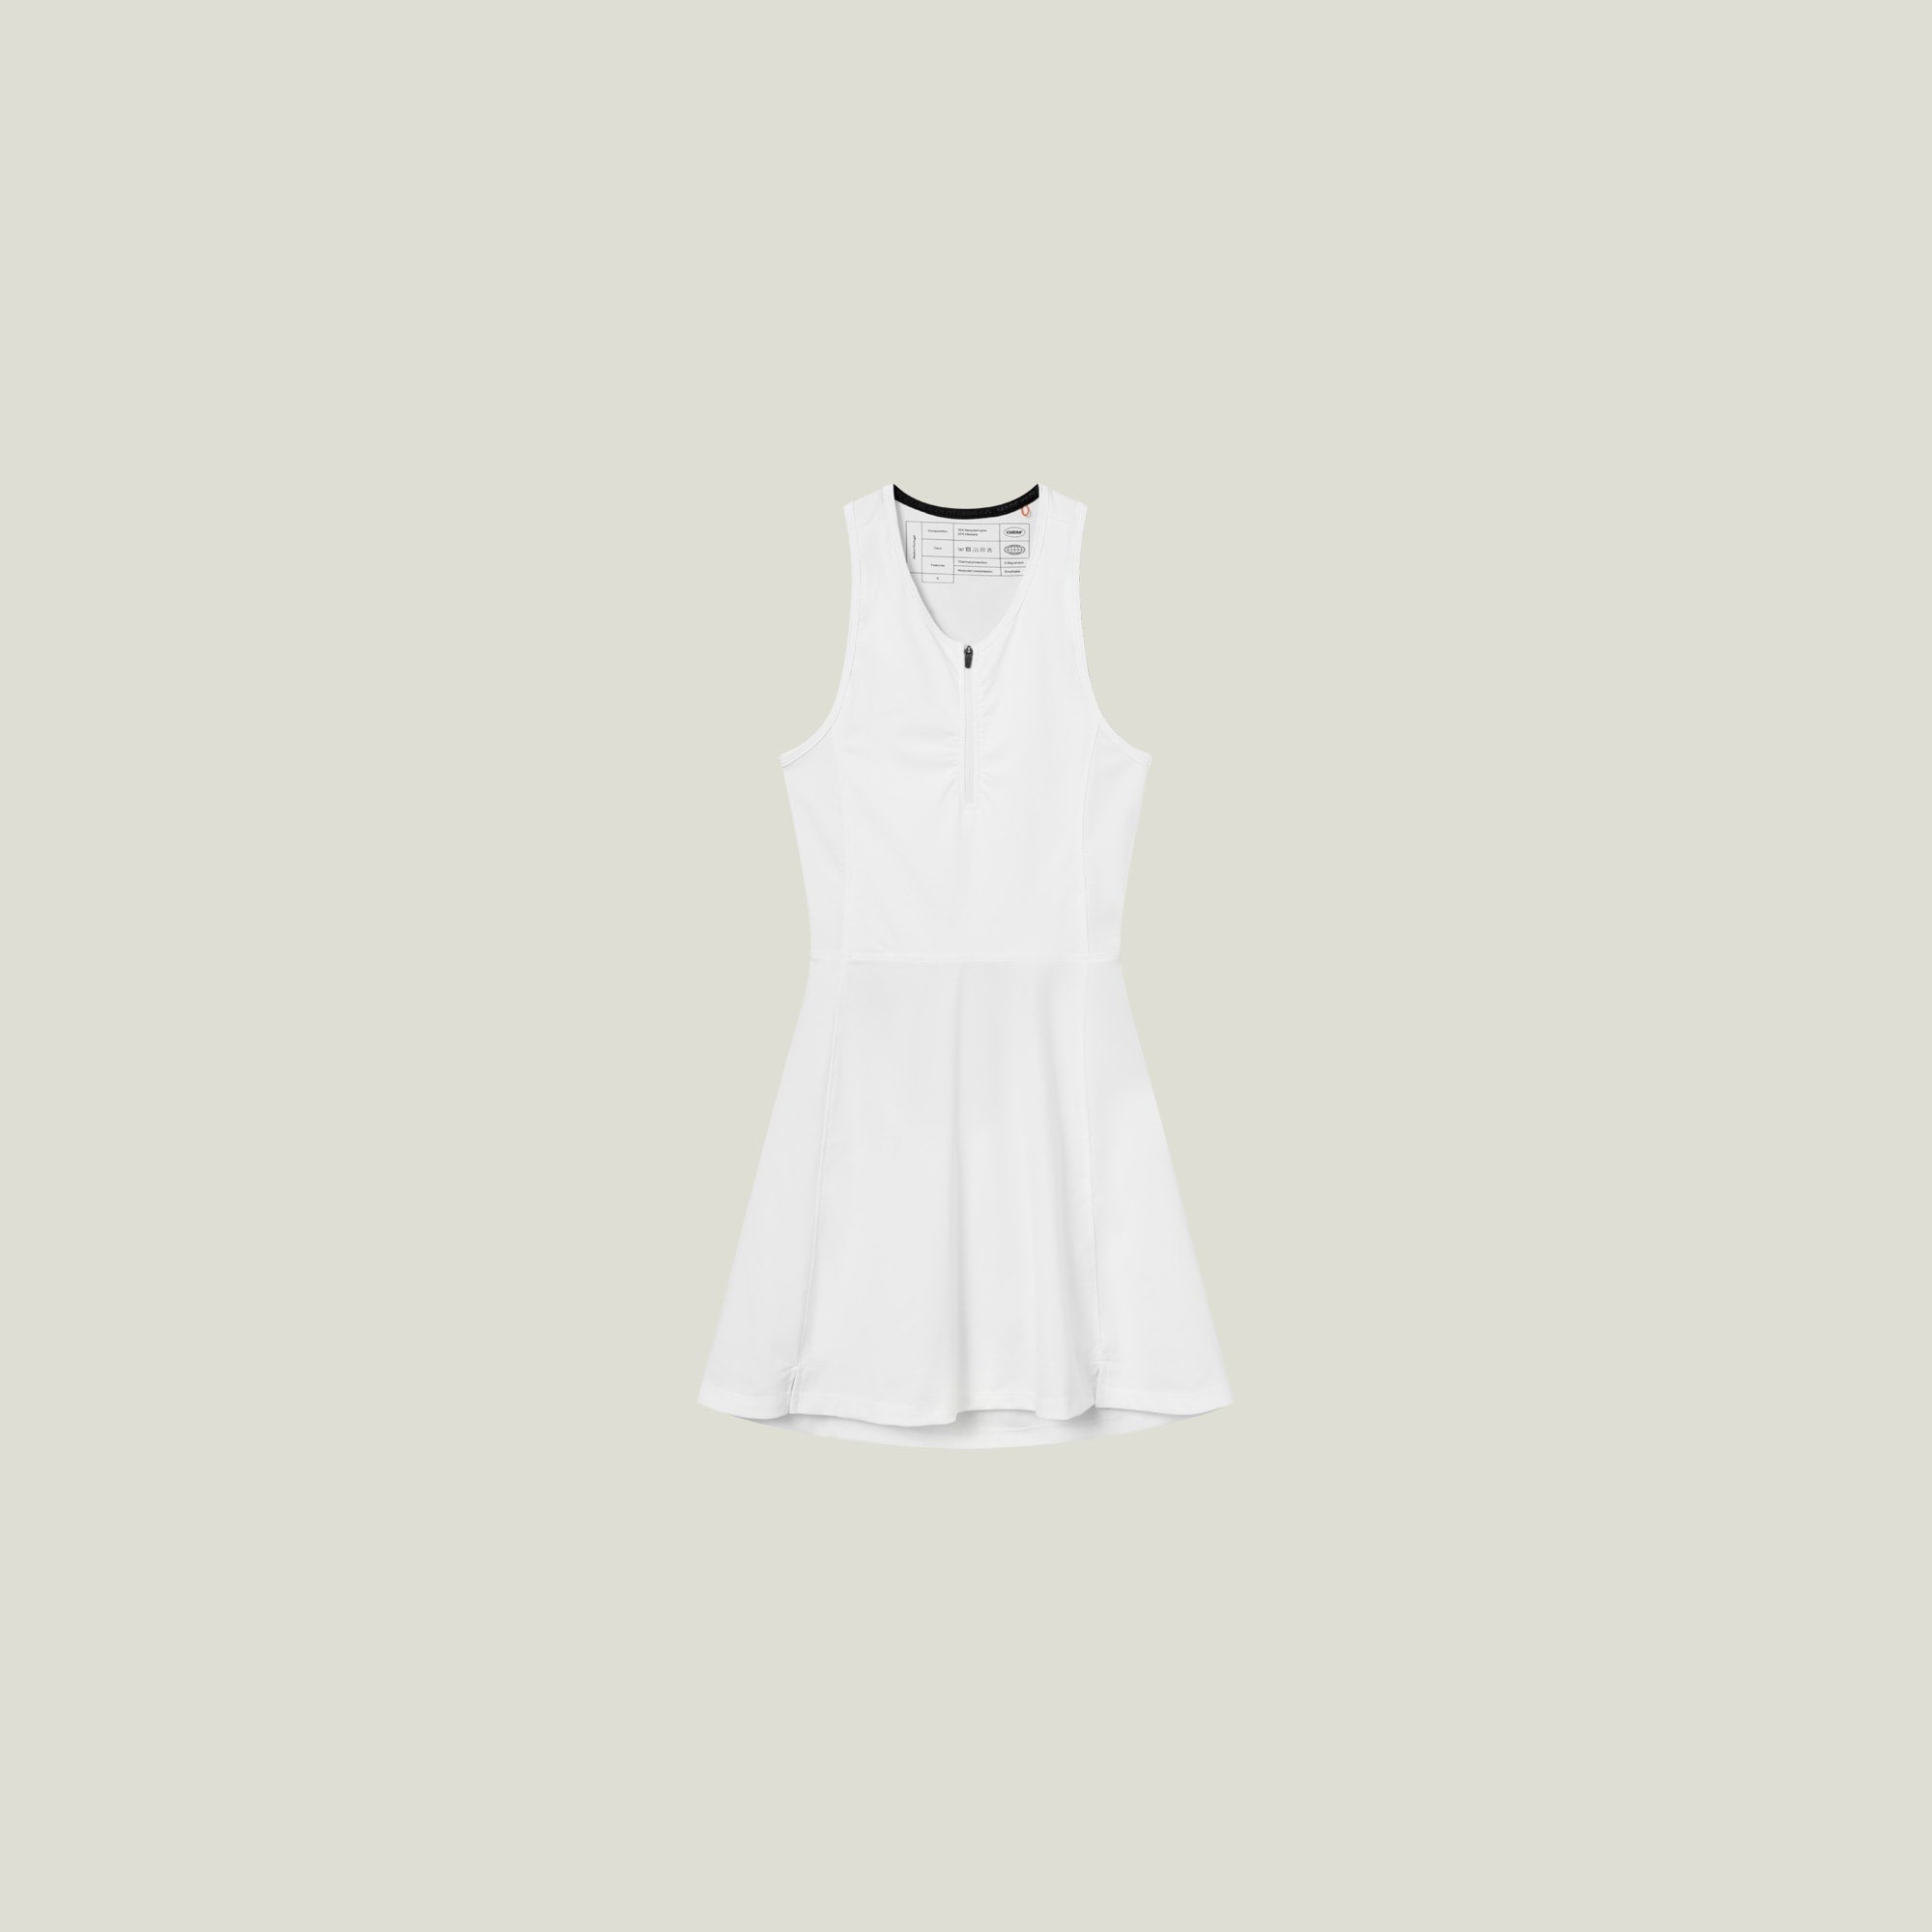 Oncourt Dress & Tights - White & Army Combo